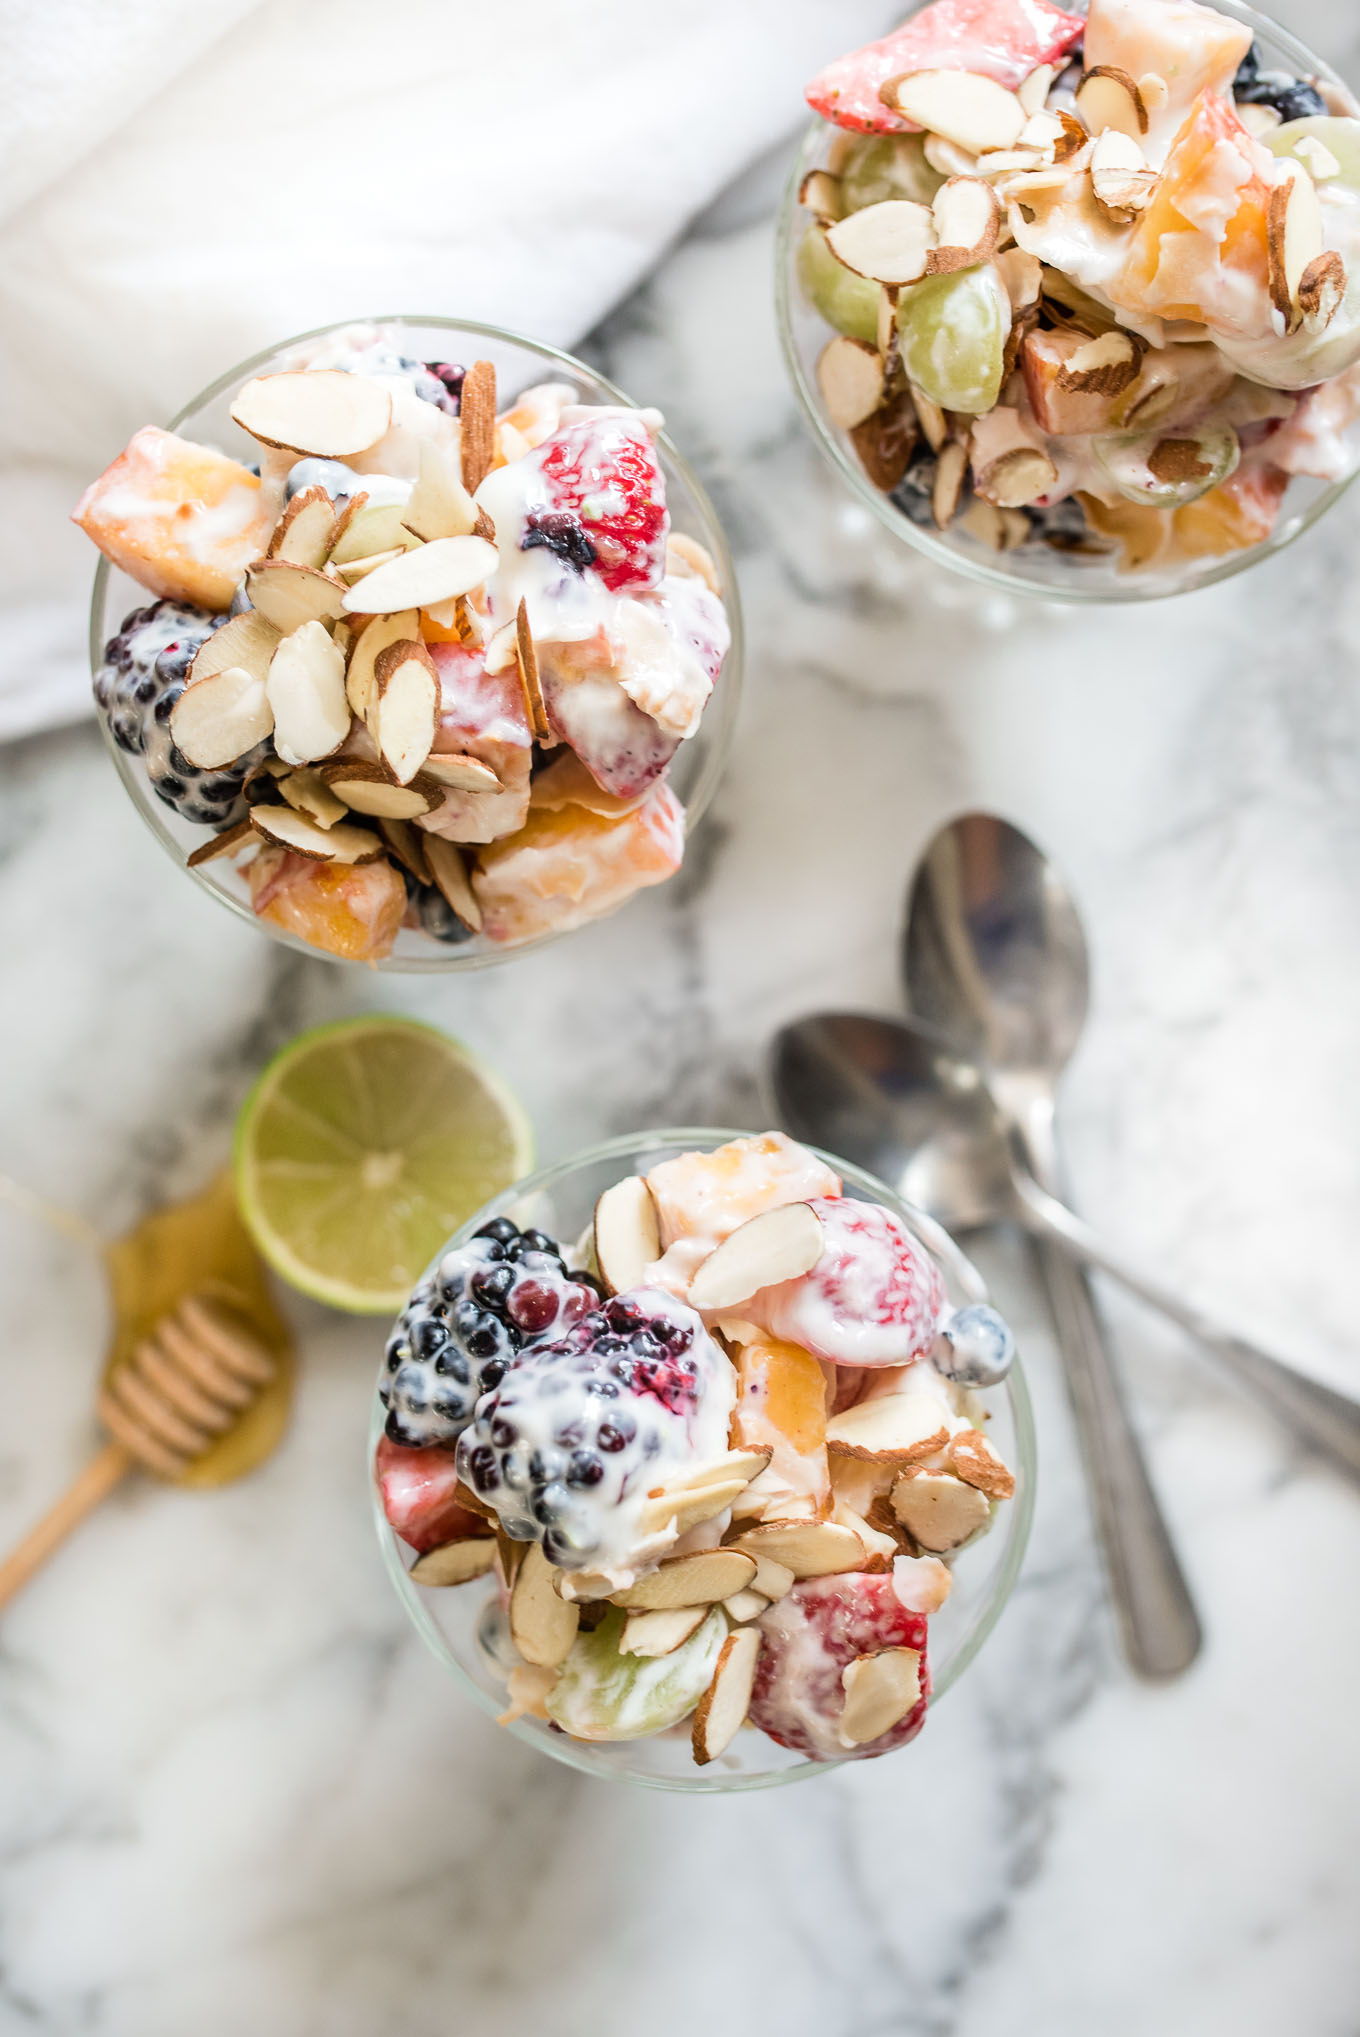 Fruit Salad with Lime Yogurt Dressing is a tangy sweet side dish and is a perfect gluten-free addition to a light breakfast, potluck or brunch.